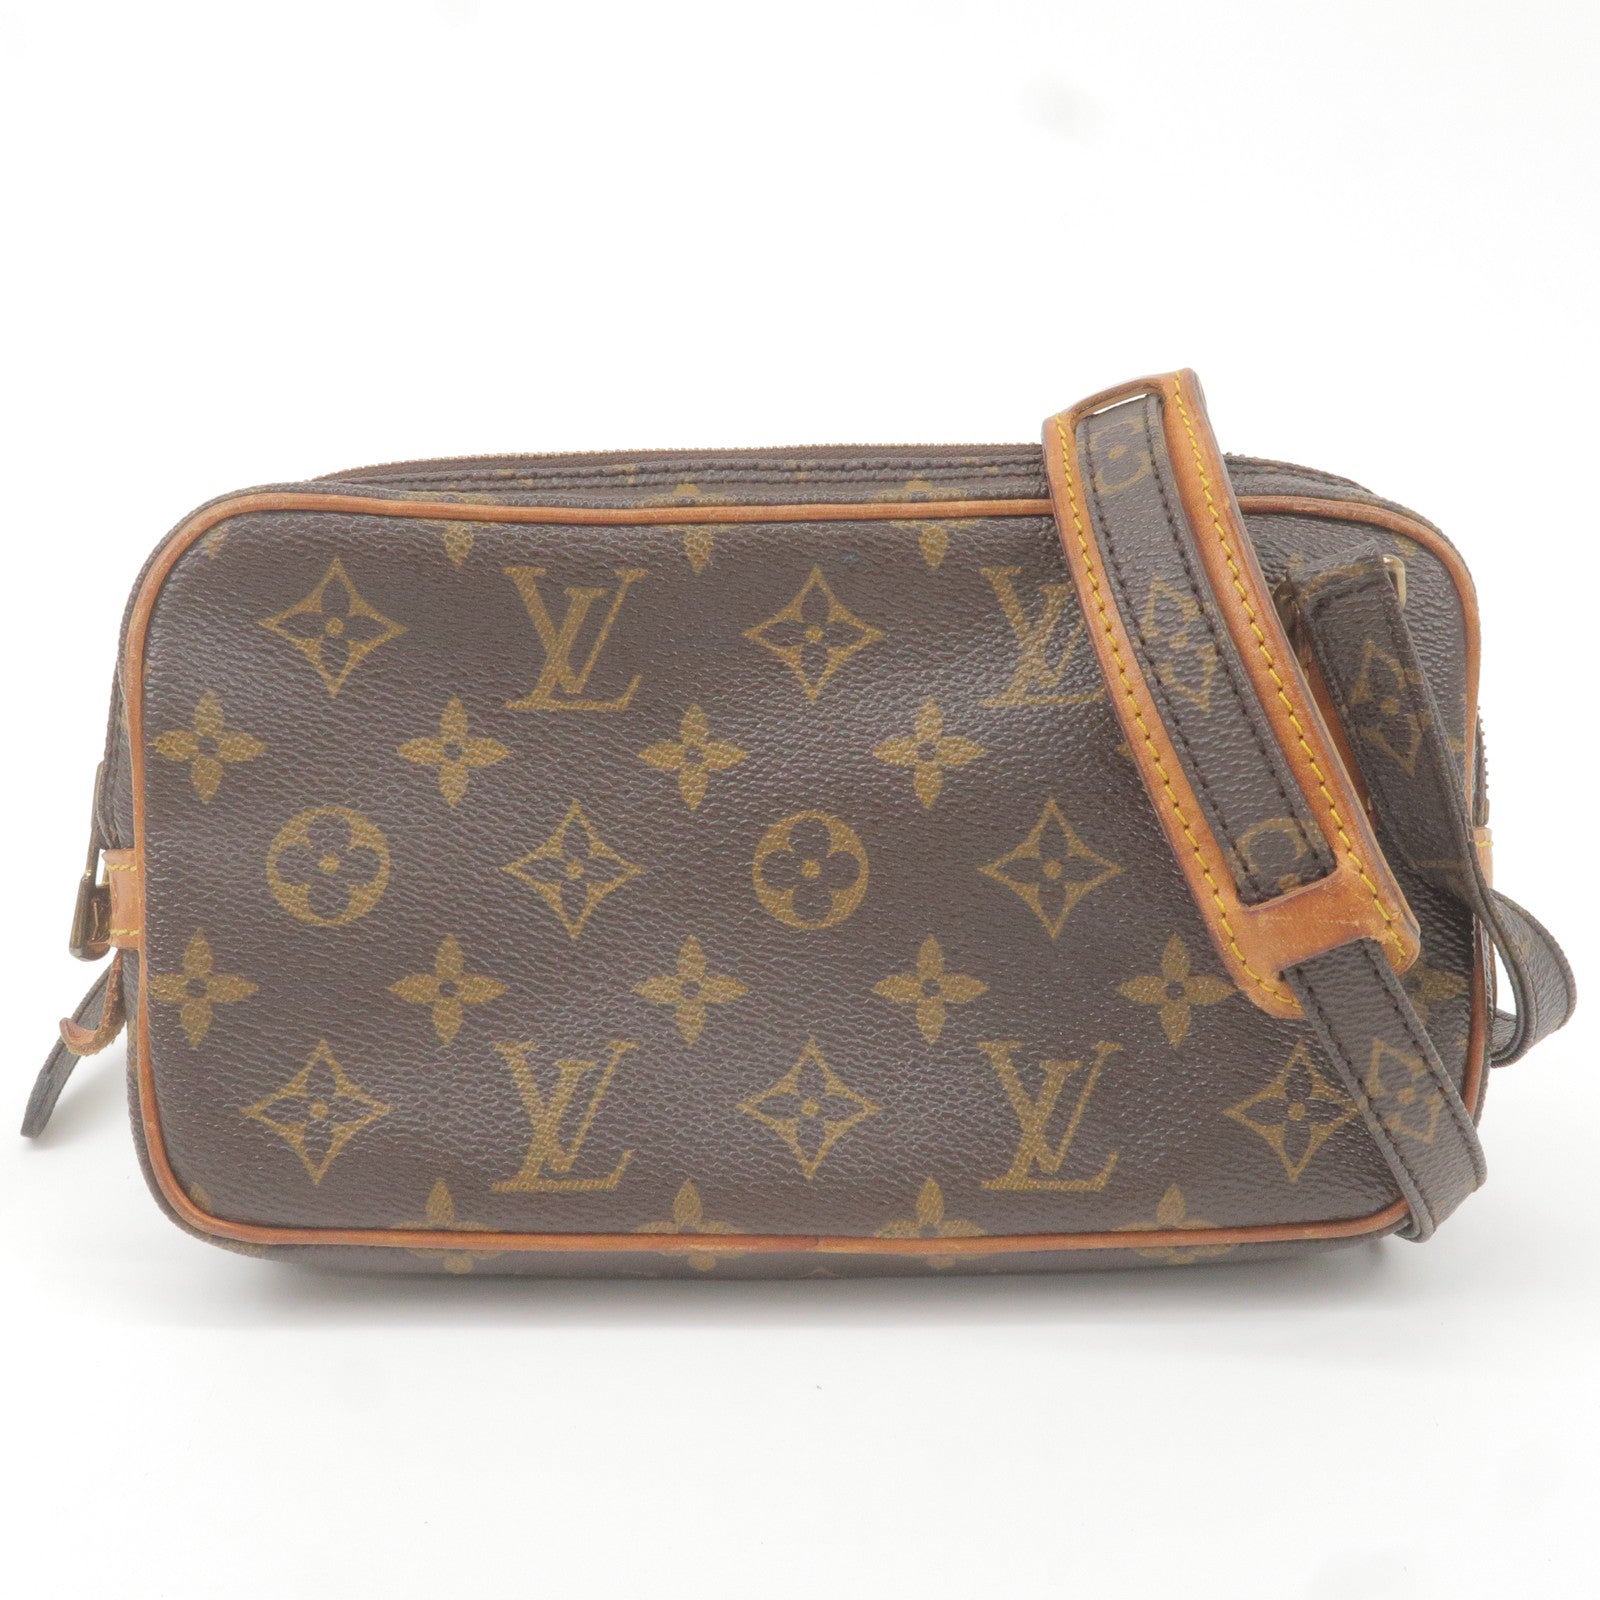 Preloved authentic Louis vuitton Lv vintage marly bandouliere monogram  sling bag